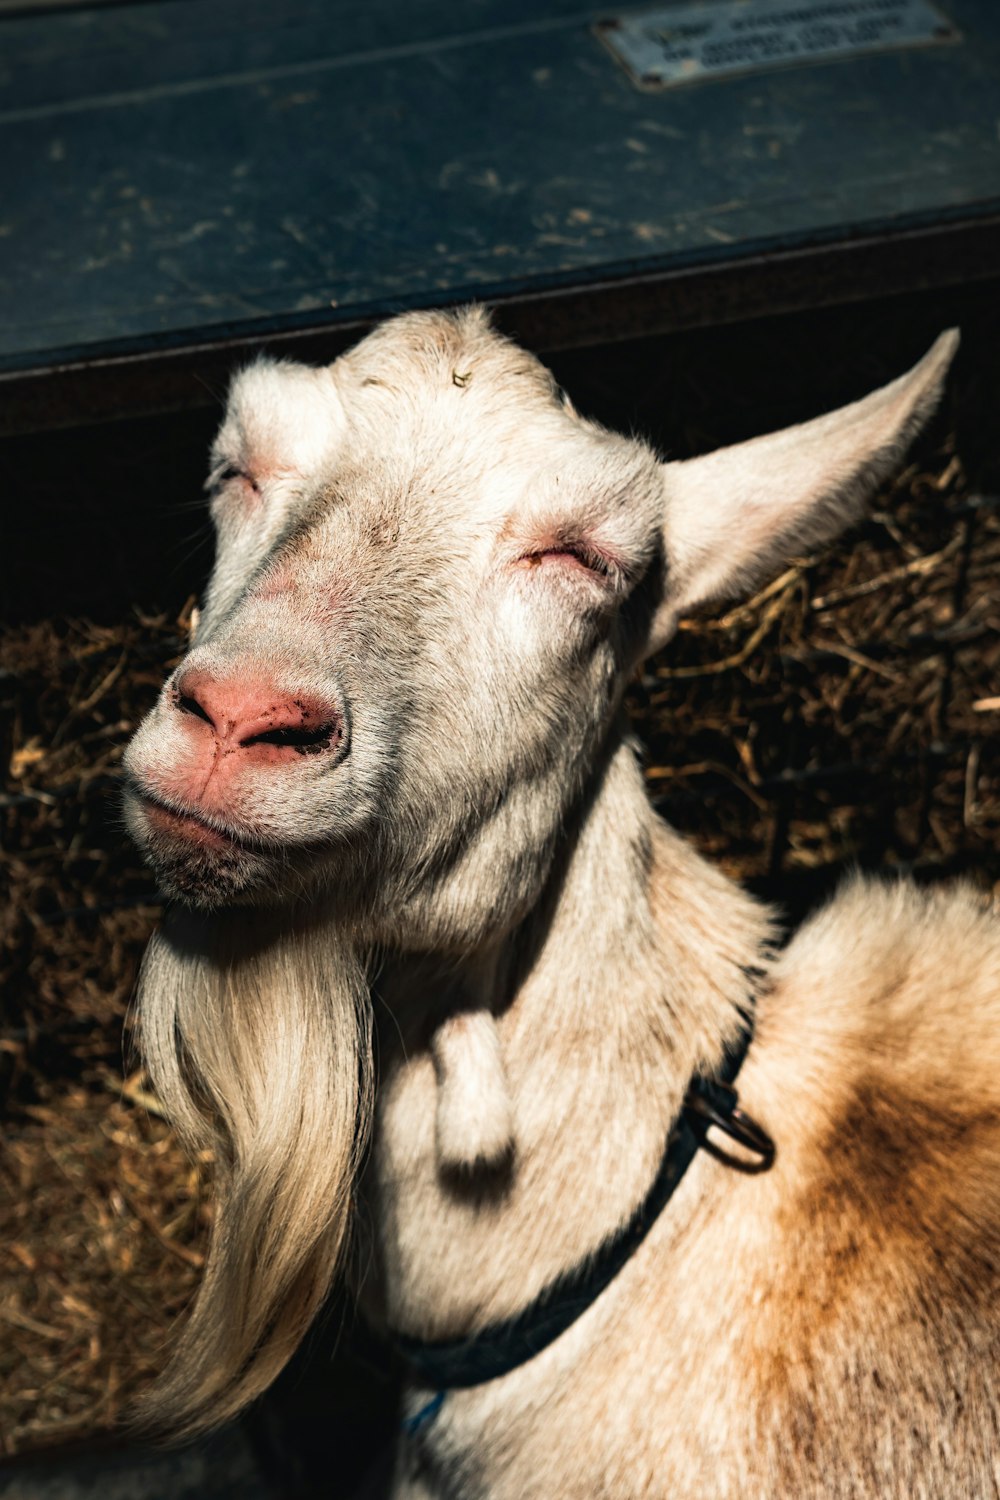 a close up of a goat with its eyes closed